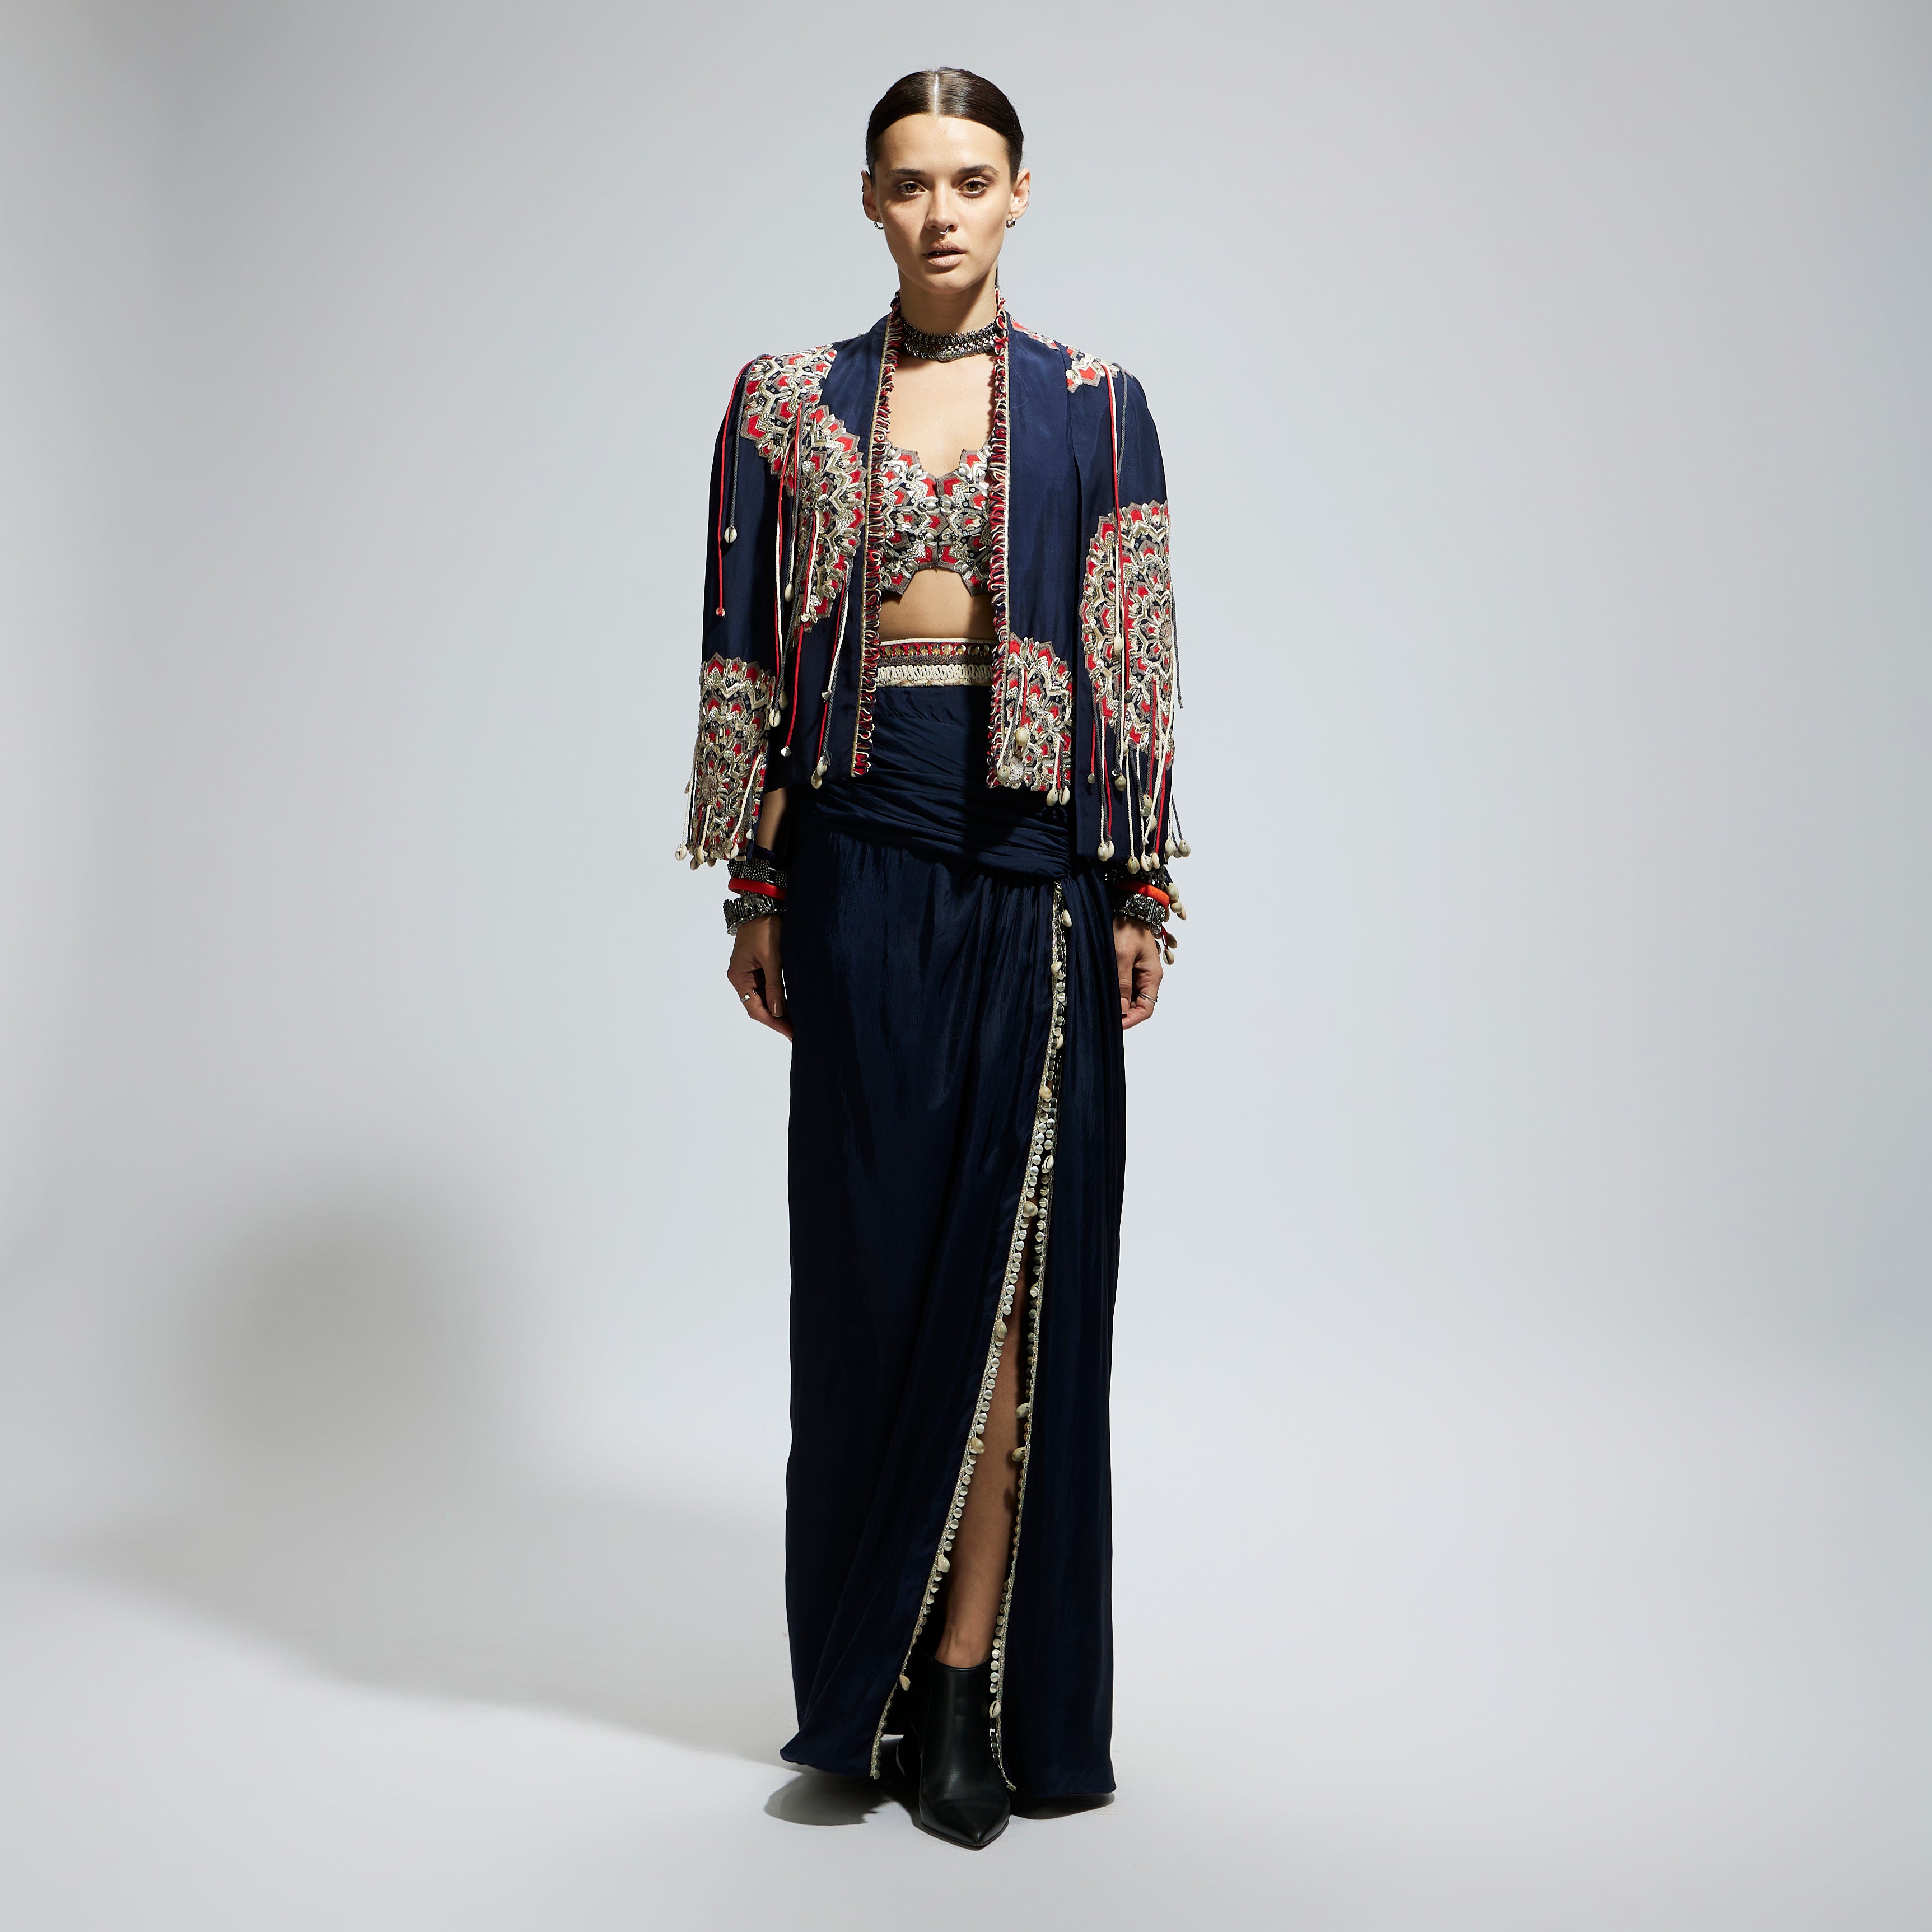 SAMSARA: BLUE ASYMETRIC THREADWORK CAPE JACKET PAIRED WITH AN EMBELLISHED BUSTIER AND HIGH SLIT SKIRT